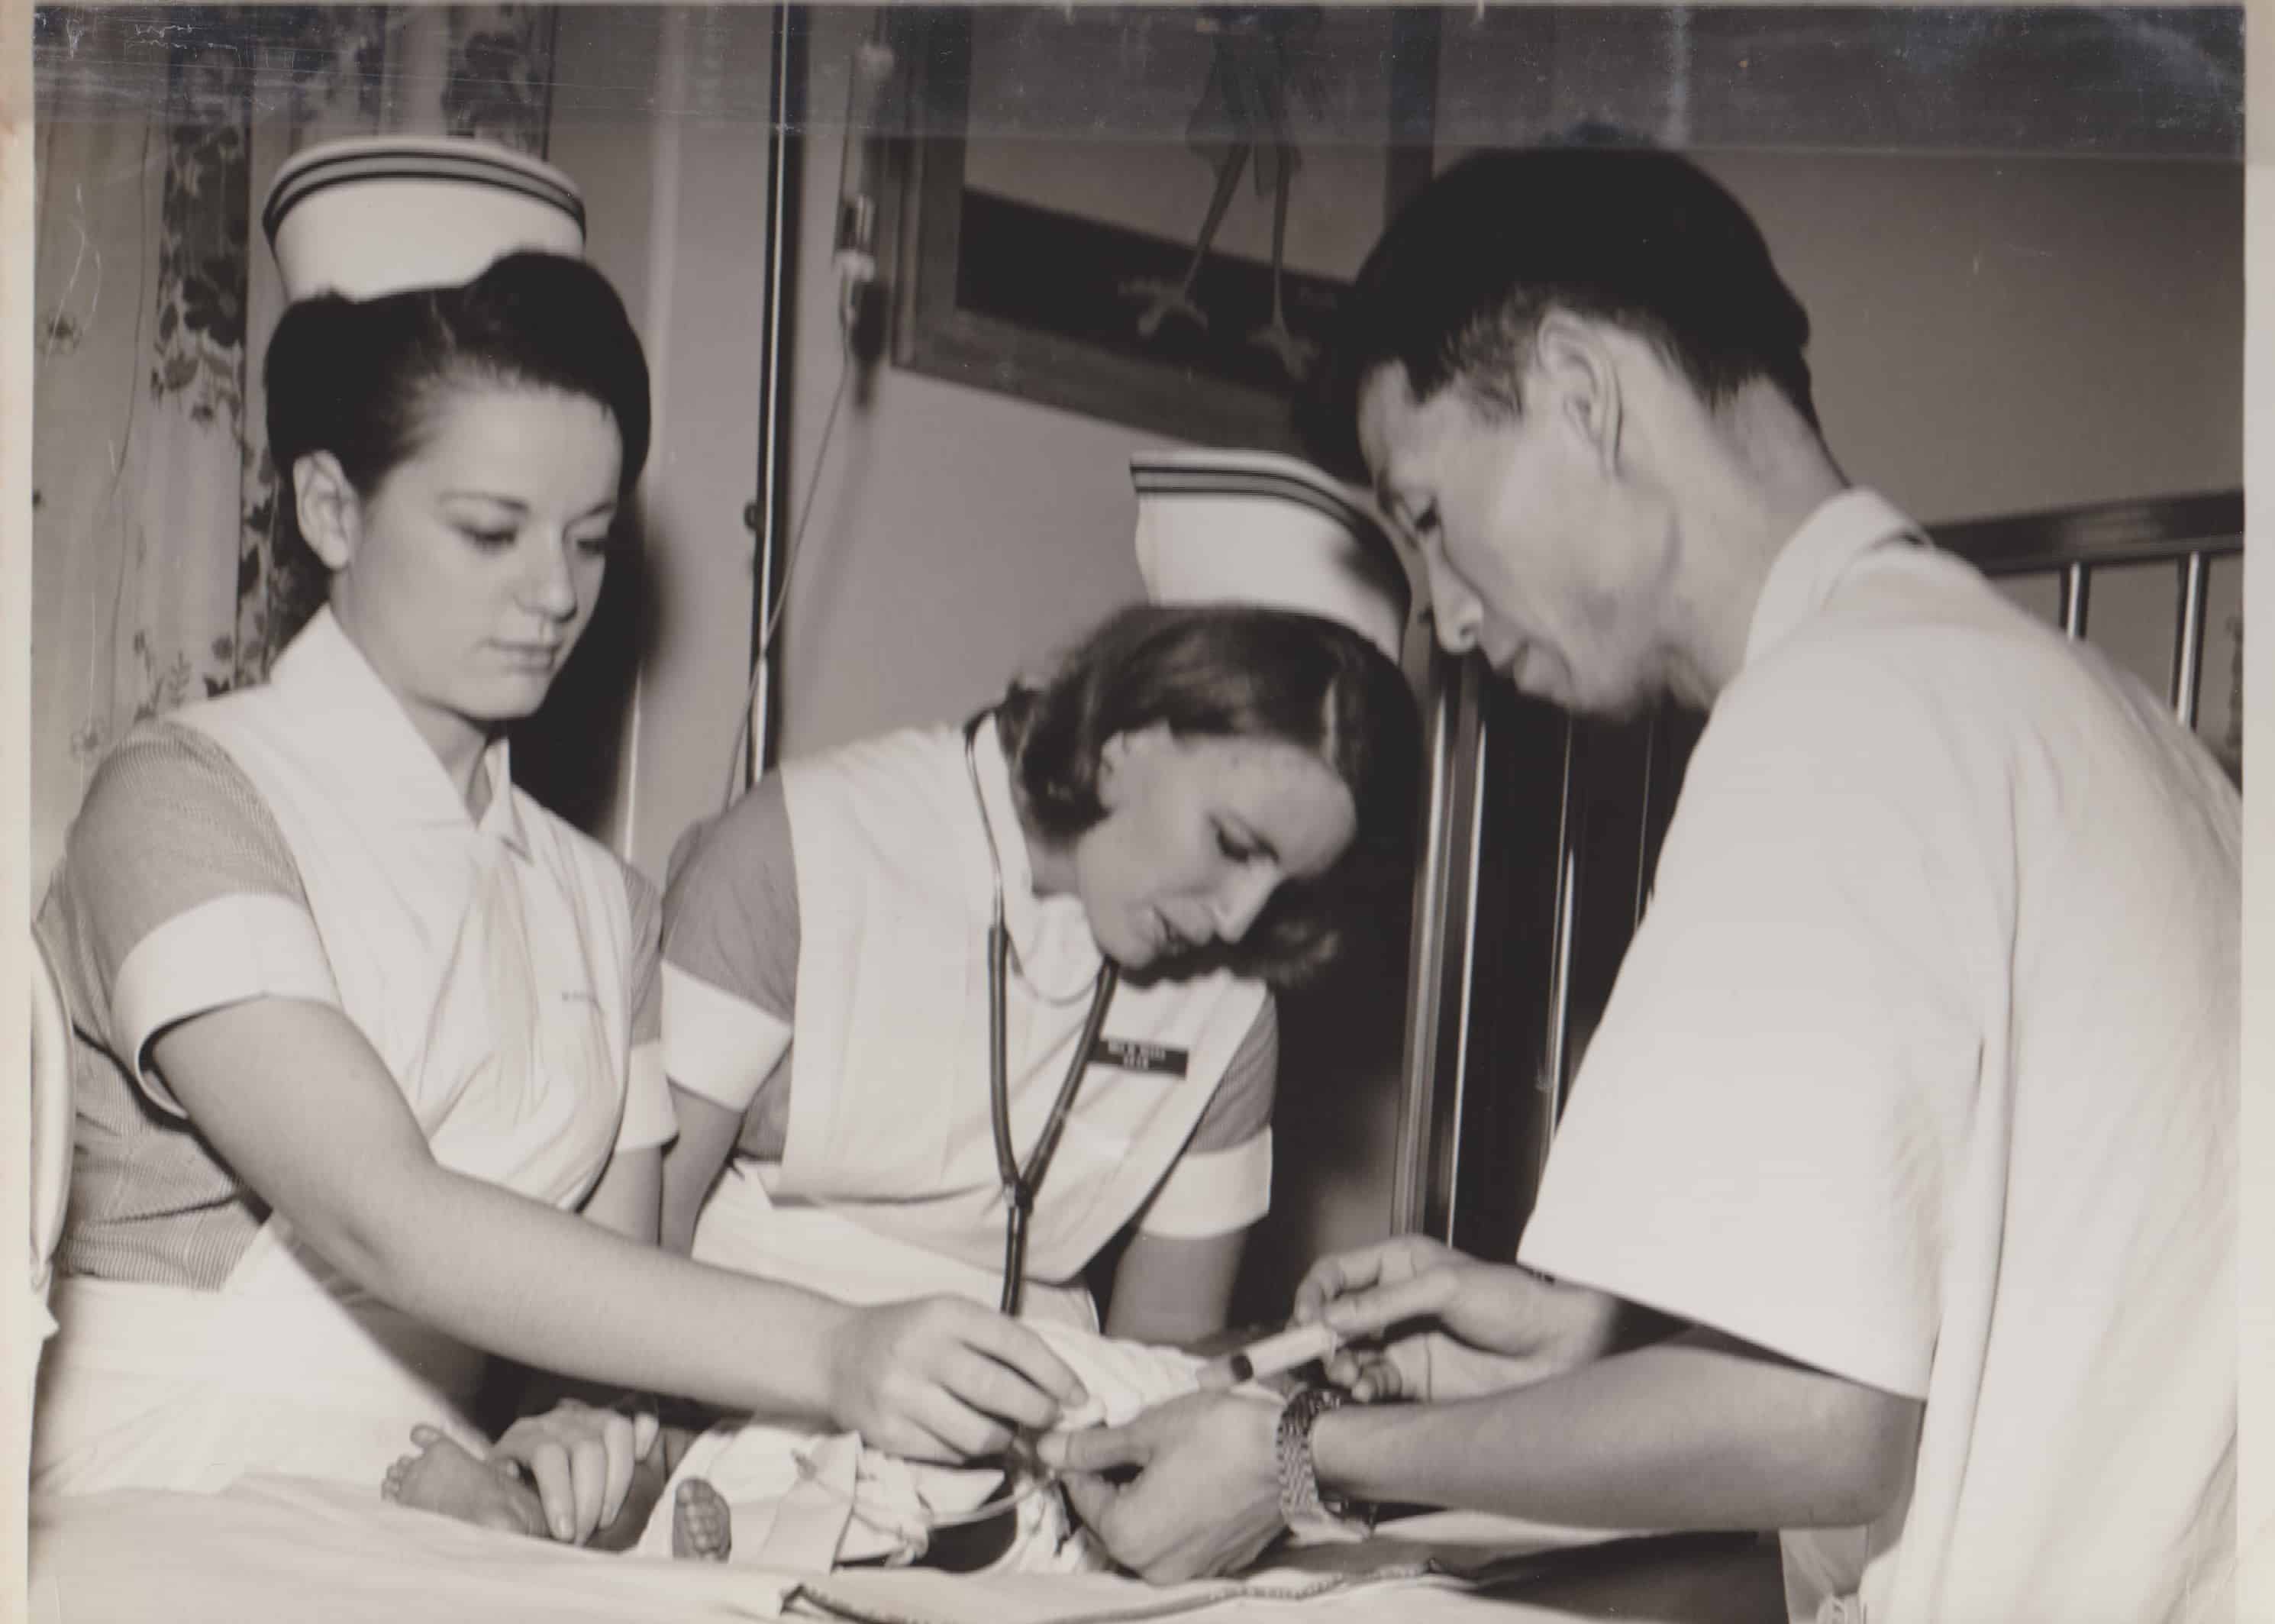 From a young age, Elaine Fendell, left, talked about becoming a nurse and helping people.